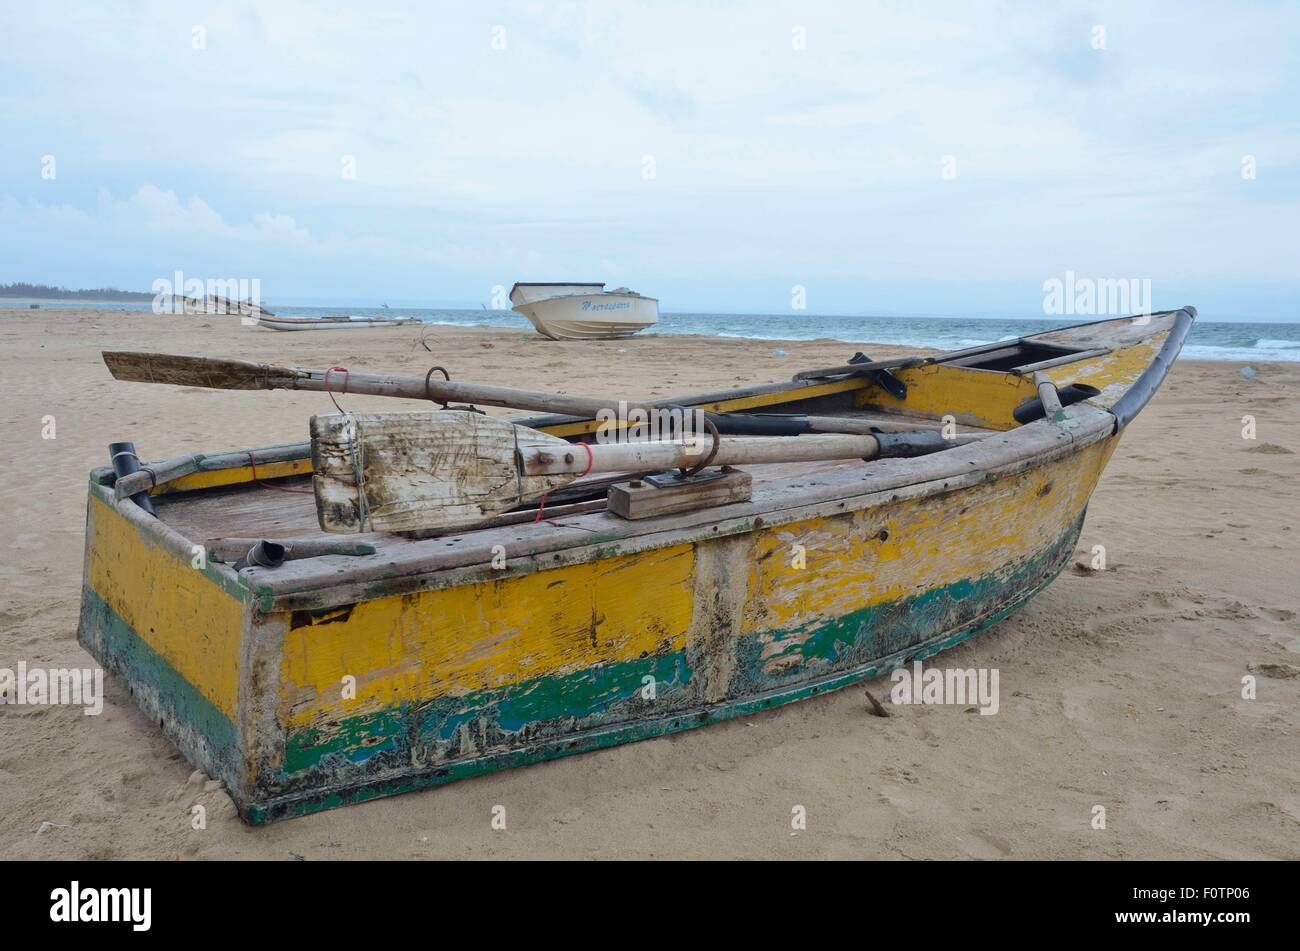 This old, unsafe fishing boat lying on the beach at Inhambane, Mozambique is in daily use. Stock Photo